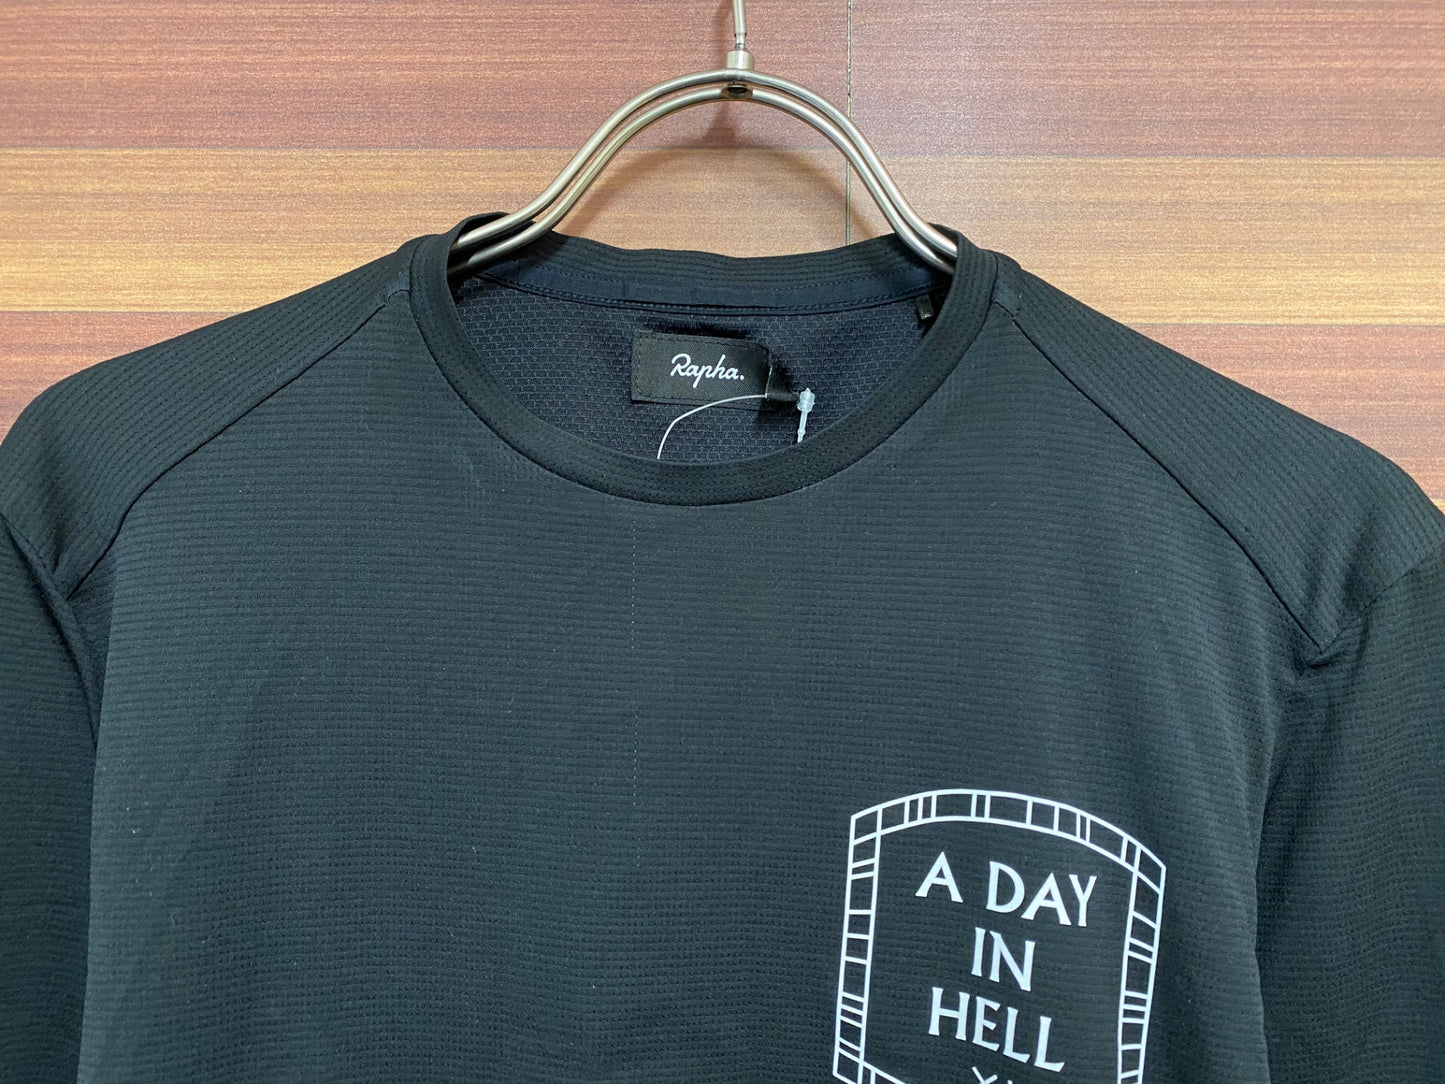 HU622 ラファ Rapha A DAY IN HELL TECHNICAL T-SHIRT 長袖 Tシャツ 黒 XS